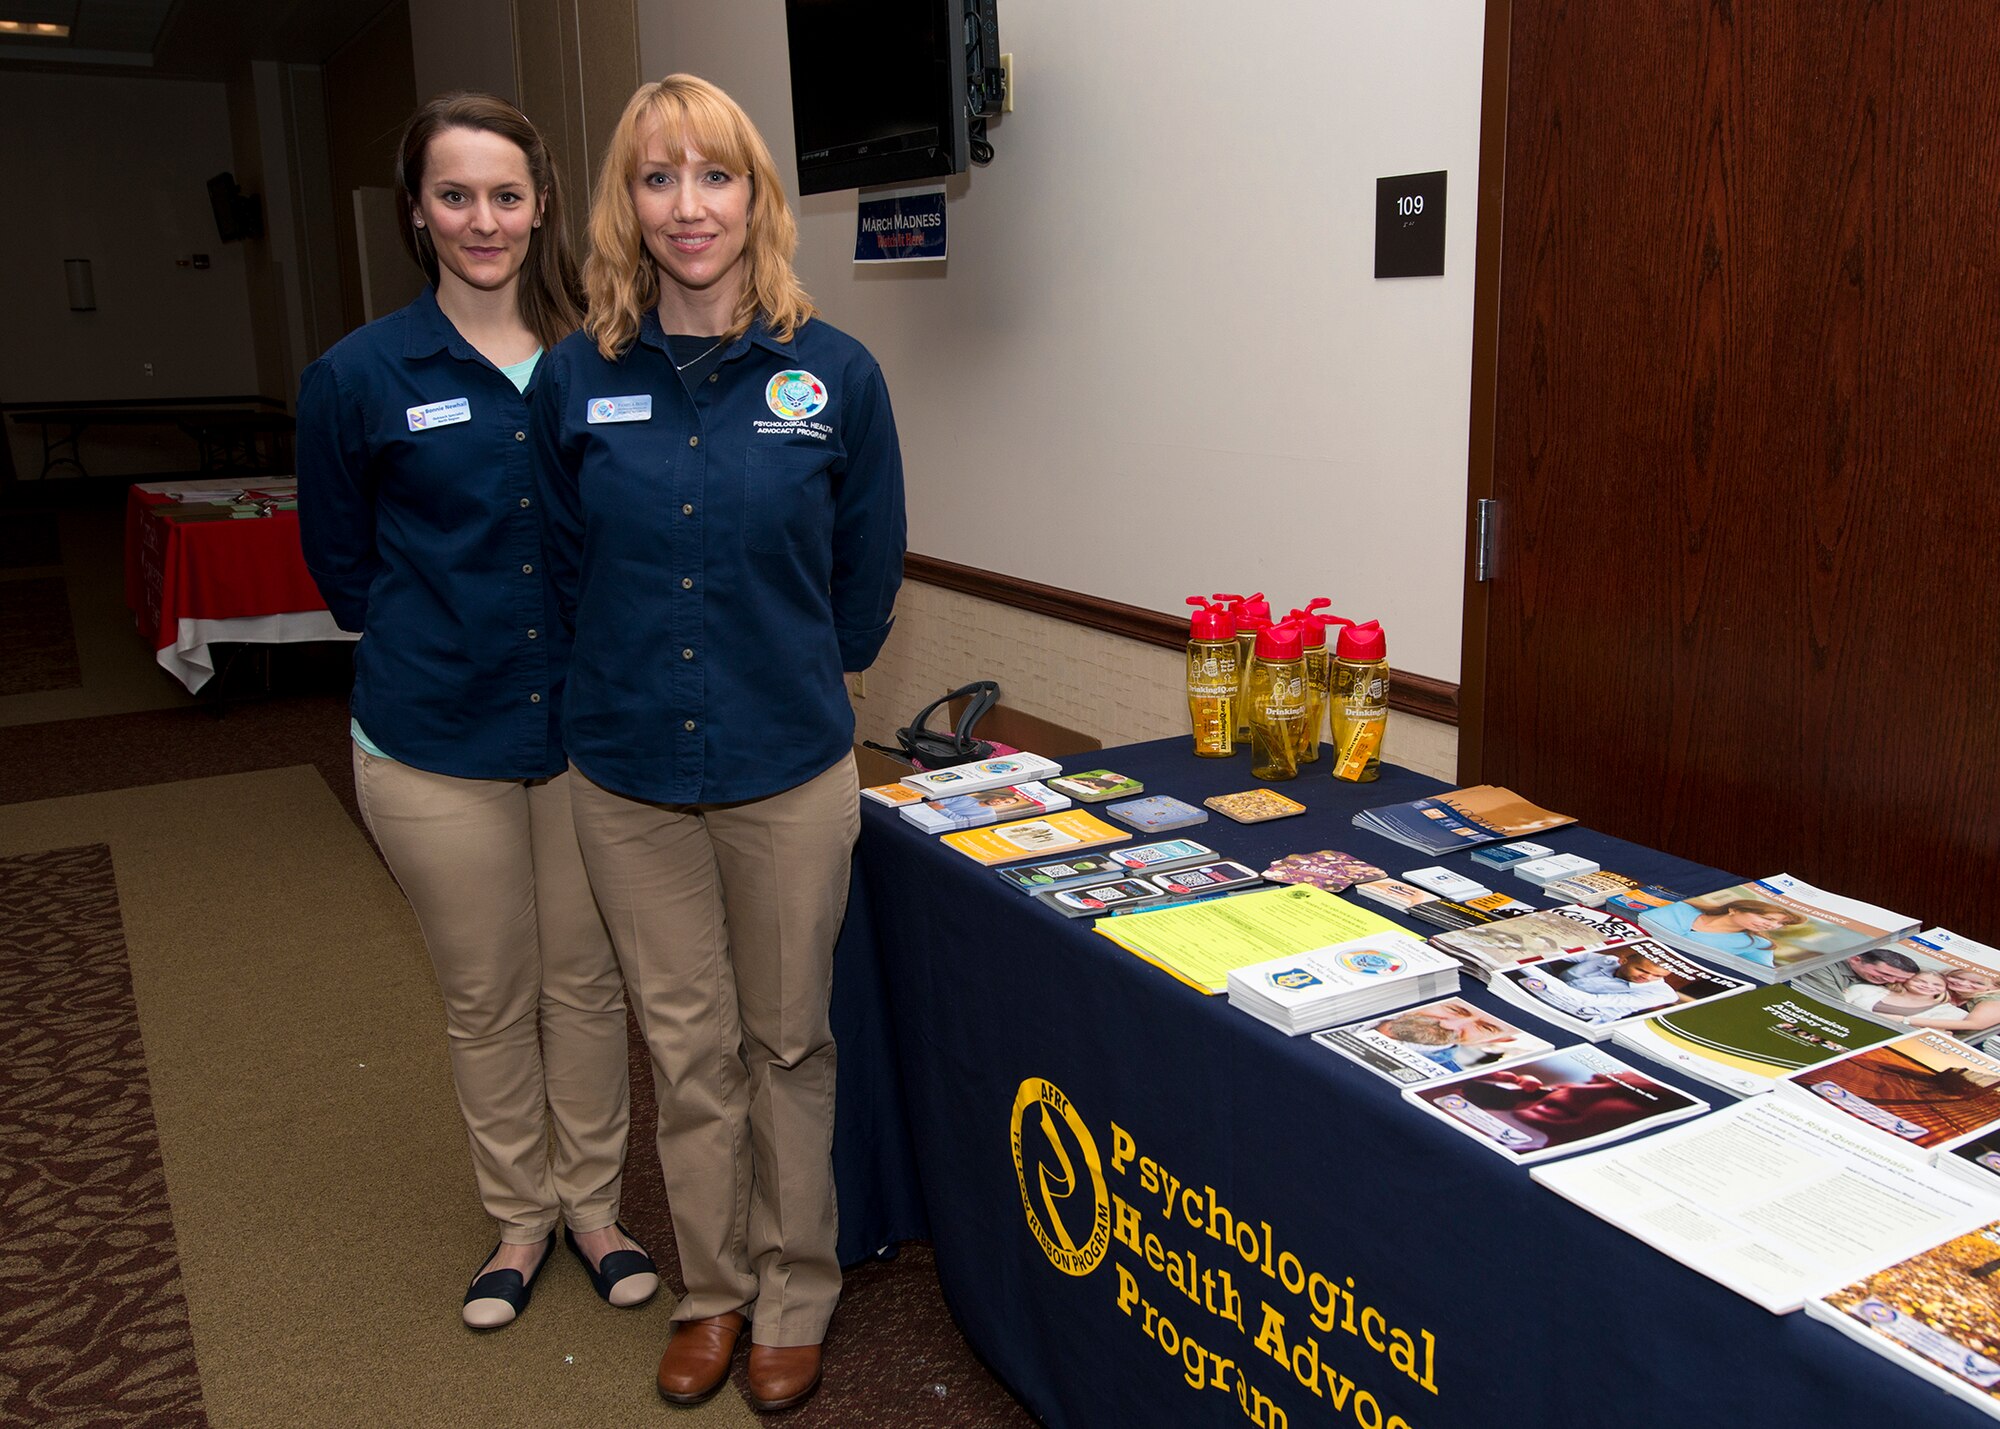 Air Force Reserve Psychological Health Advocate Program Out Reach Specialists Bonnie Newhall (left) and Pamela Boyd host an information table at the Niagara Falls Air Reserve Station Community Activity Center, April 4, 2014.  An Airman or spouse can come to PHAP for any reason and PHAP will work as a conduit to confidentially provide any and all resources that will benefit the Airman or family. (U.S. Air Force photo by Tech. Sgt. Joseph McKee)